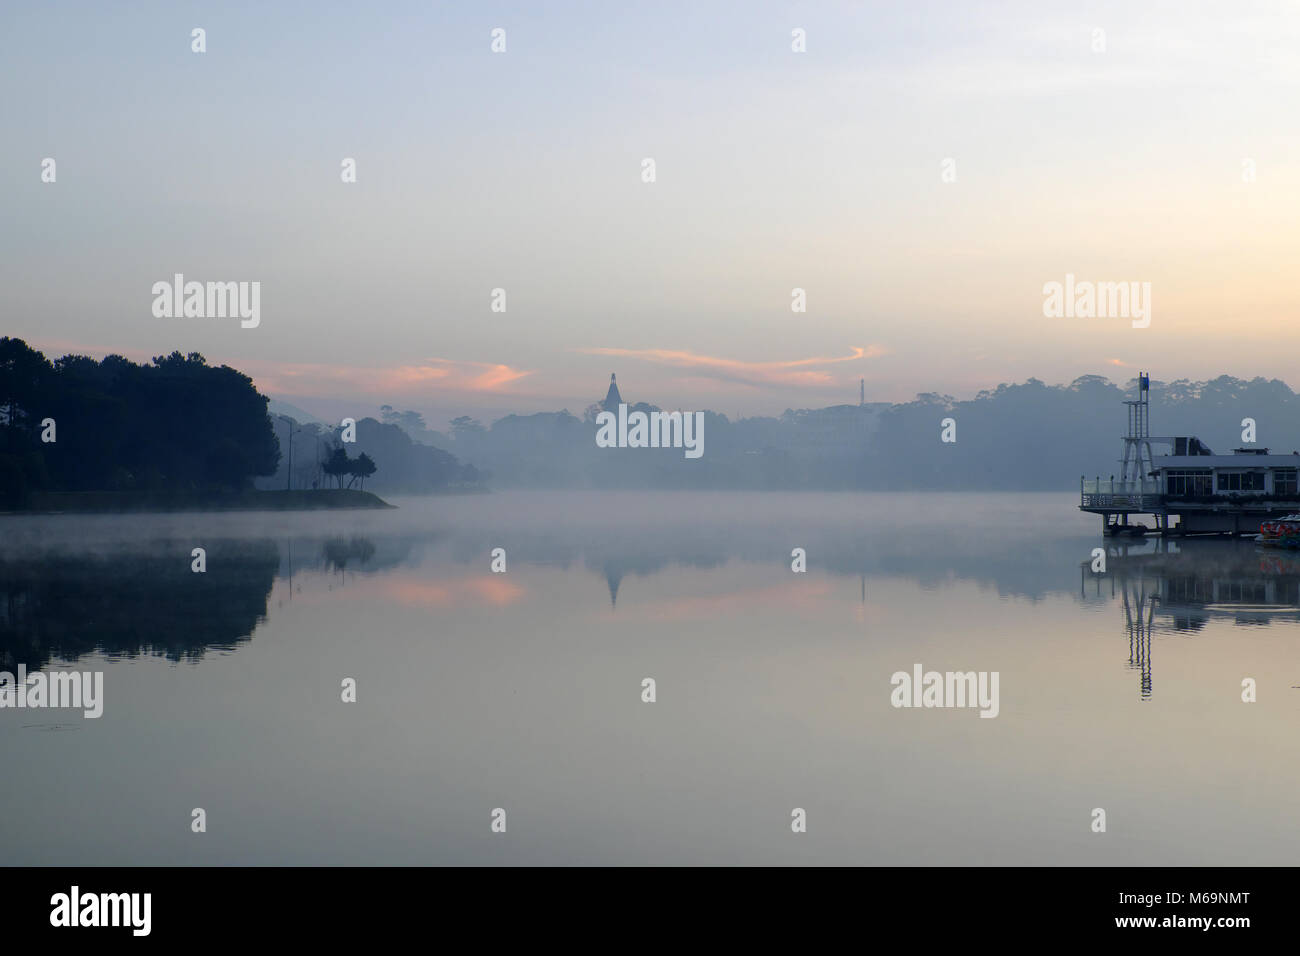 Wonderful scenery of Da Lat city at sunrise, Thuy Ta restaurant reflect on water, yellow sky and lake in fog make romantic place for Vietnam travel Stock Photo